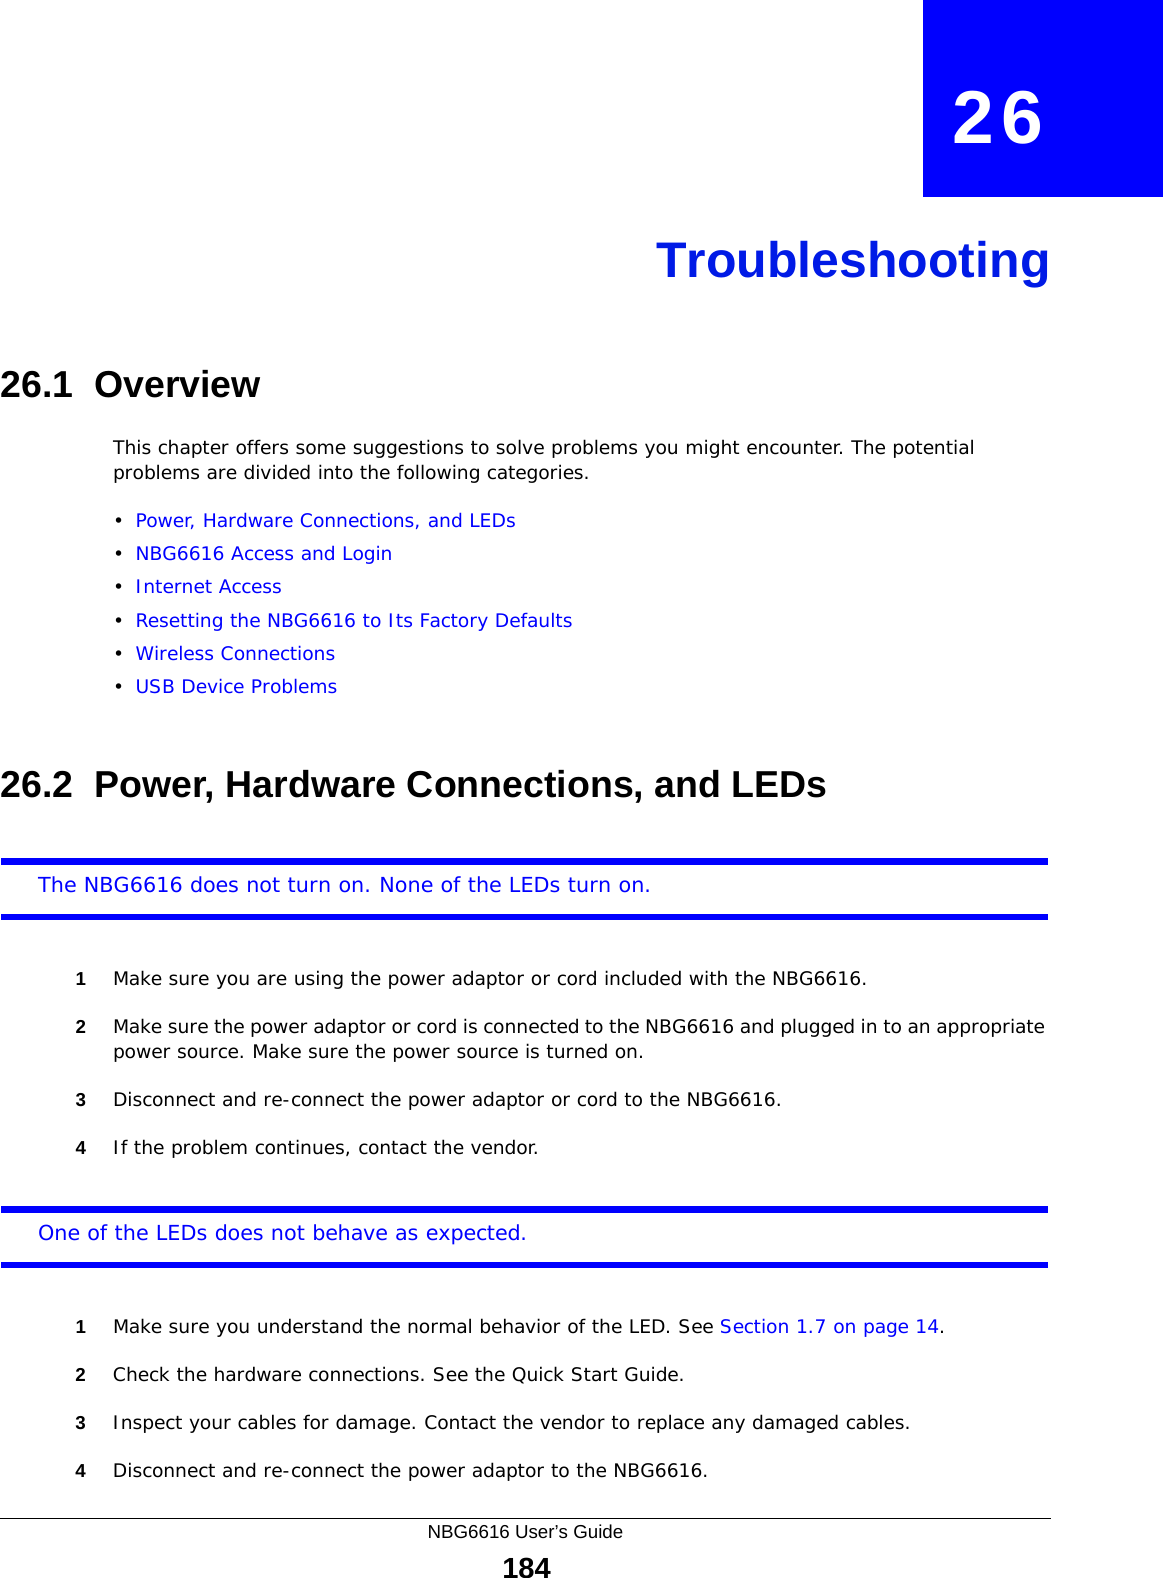 NBG6616 User’s Guide184CHAPTER   26Troubleshooting26.1  OverviewThis chapter offers some suggestions to solve problems you might encounter. The potential problems are divided into the following categories. •Power, Hardware Connections, and LEDs•NBG6616 Access and Login•Internet Access•Resetting the NBG6616 to Its Factory Defaults•Wireless Connections•USB Device Problems26.2  Power, Hardware Connections, and LEDsThe NBG6616 does not turn on. None of the LEDs turn on.1Make sure you are using the power adaptor or cord included with the NBG6616.2Make sure the power adaptor or cord is connected to the NBG6616 and plugged in to an appropriate power source. Make sure the power source is turned on.3Disconnect and re-connect the power adaptor or cord to the NBG6616.4If the problem continues, contact the vendor.One of the LEDs does not behave as expected.1Make sure you understand the normal behavior of the LED. See Section 1.7 on page 14.2Check the hardware connections. See the Quick Start Guide. 3Inspect your cables for damage. Contact the vendor to replace any damaged cables.4Disconnect and re-connect the power adaptor to the NBG6616. 